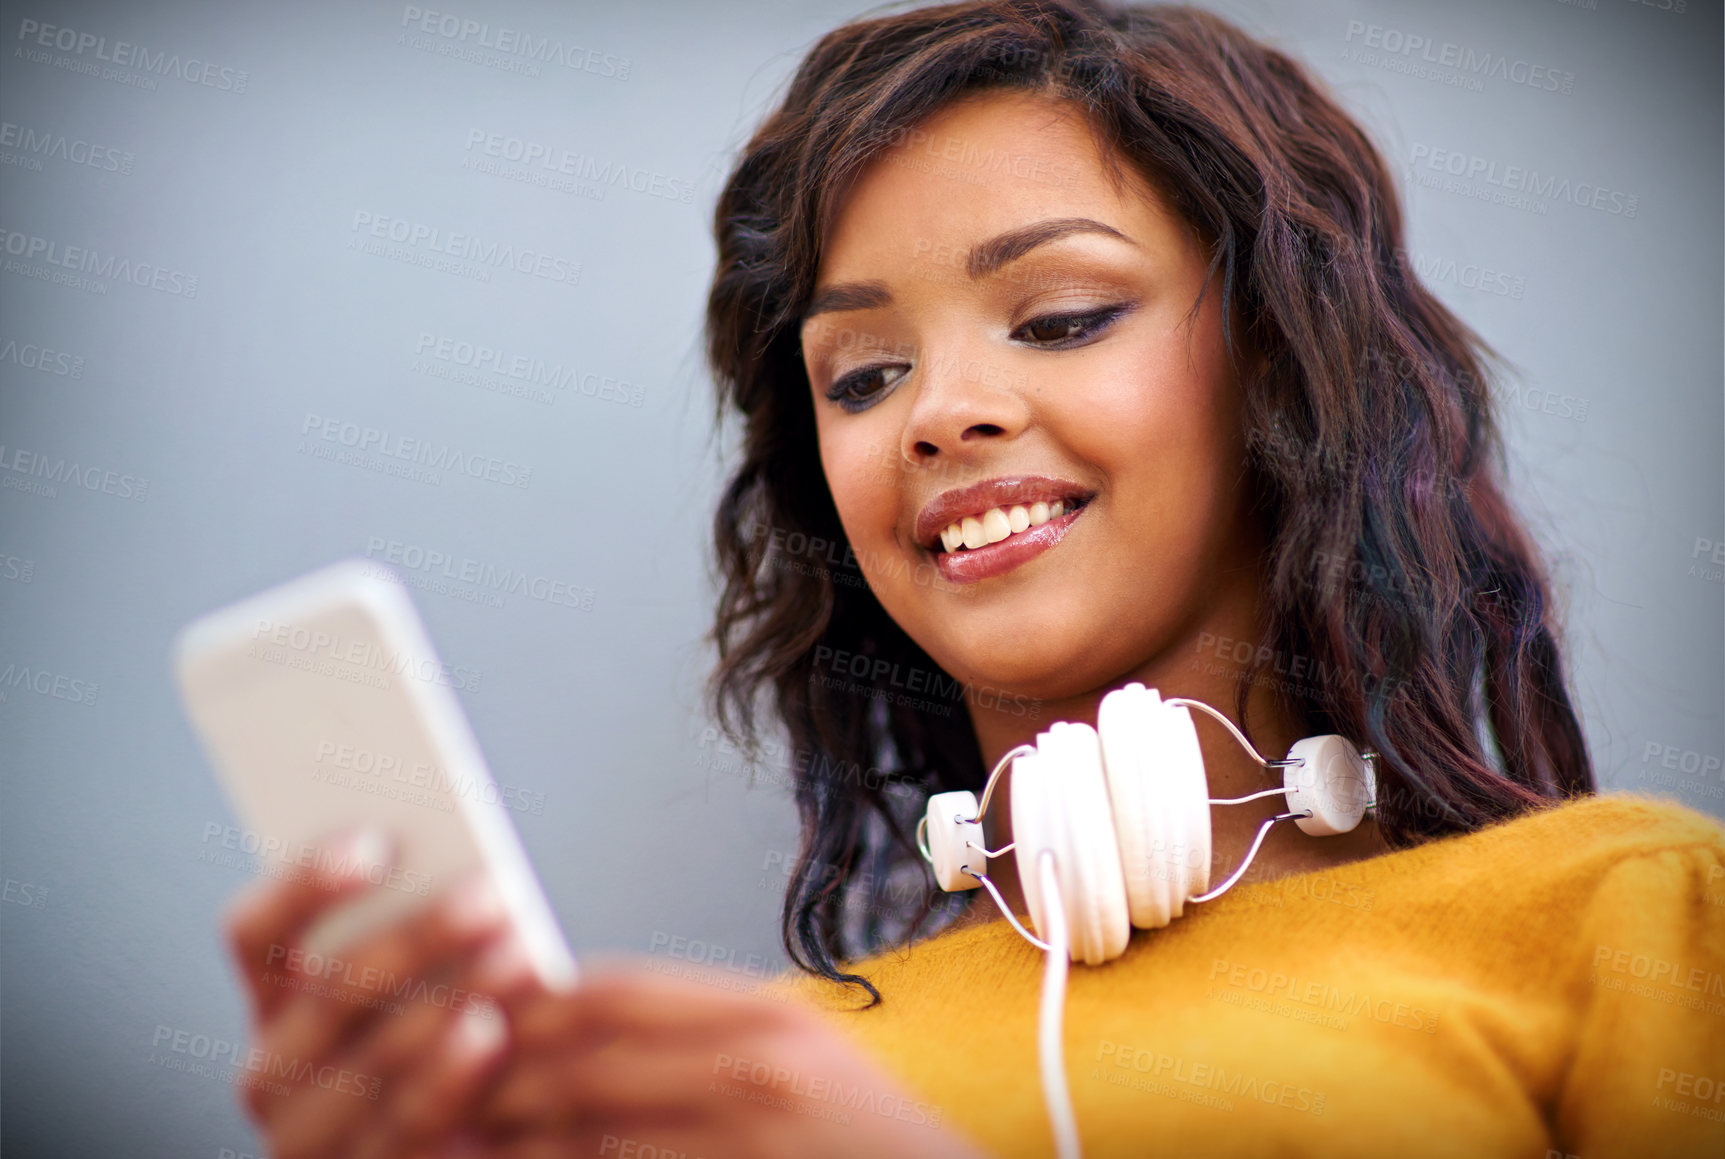 Buy stock photo Studio shot of a young woman with headphones around her neck using a mobile phone against a gray background